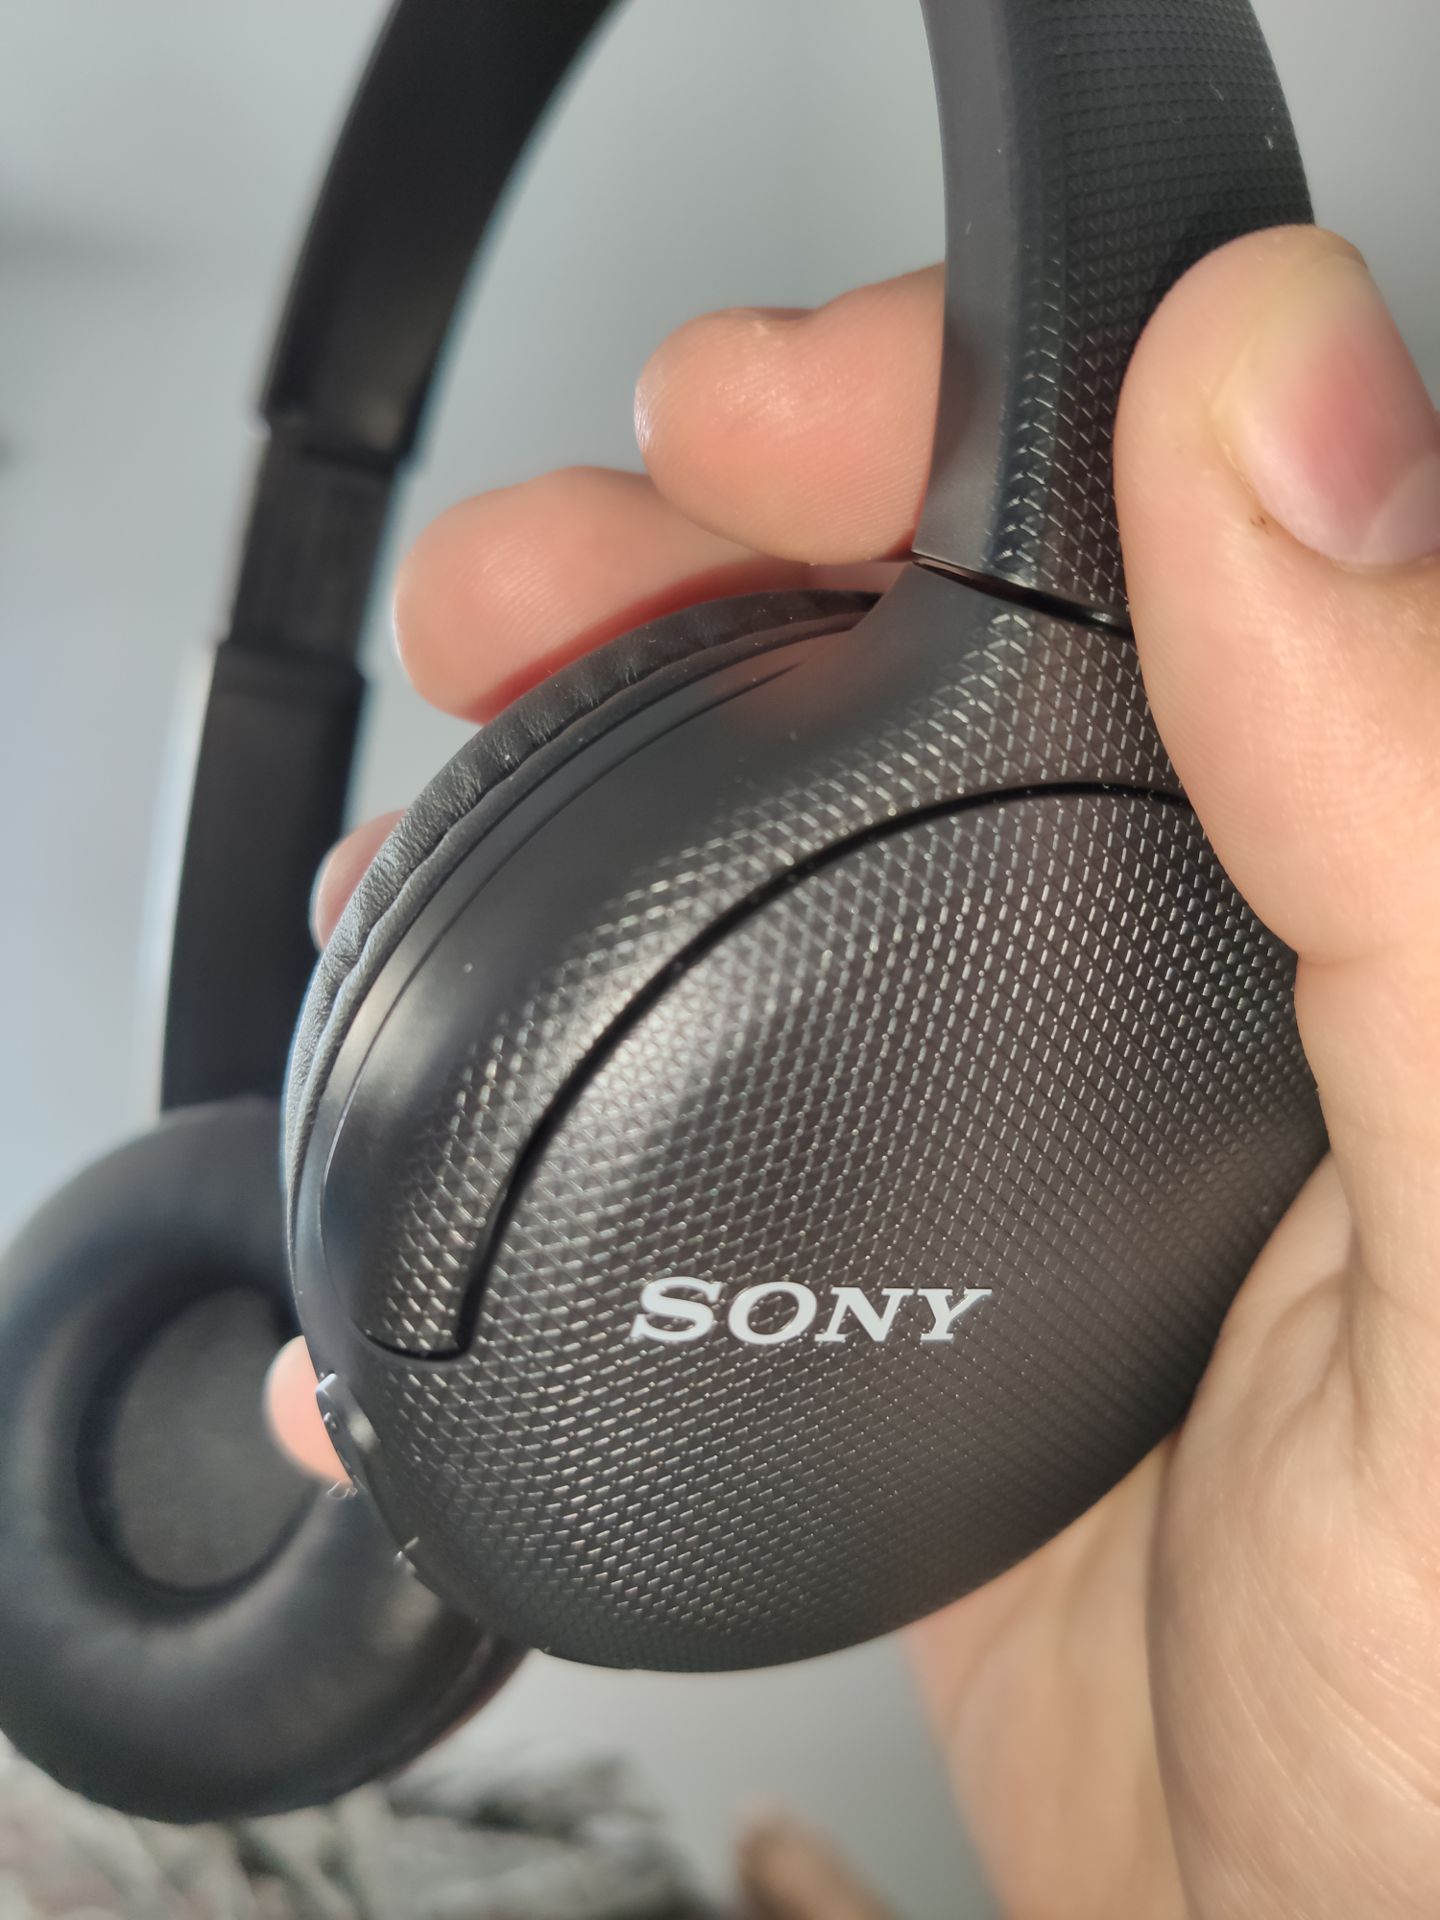 SONY WH-CH510 – Good enough wireless headphones